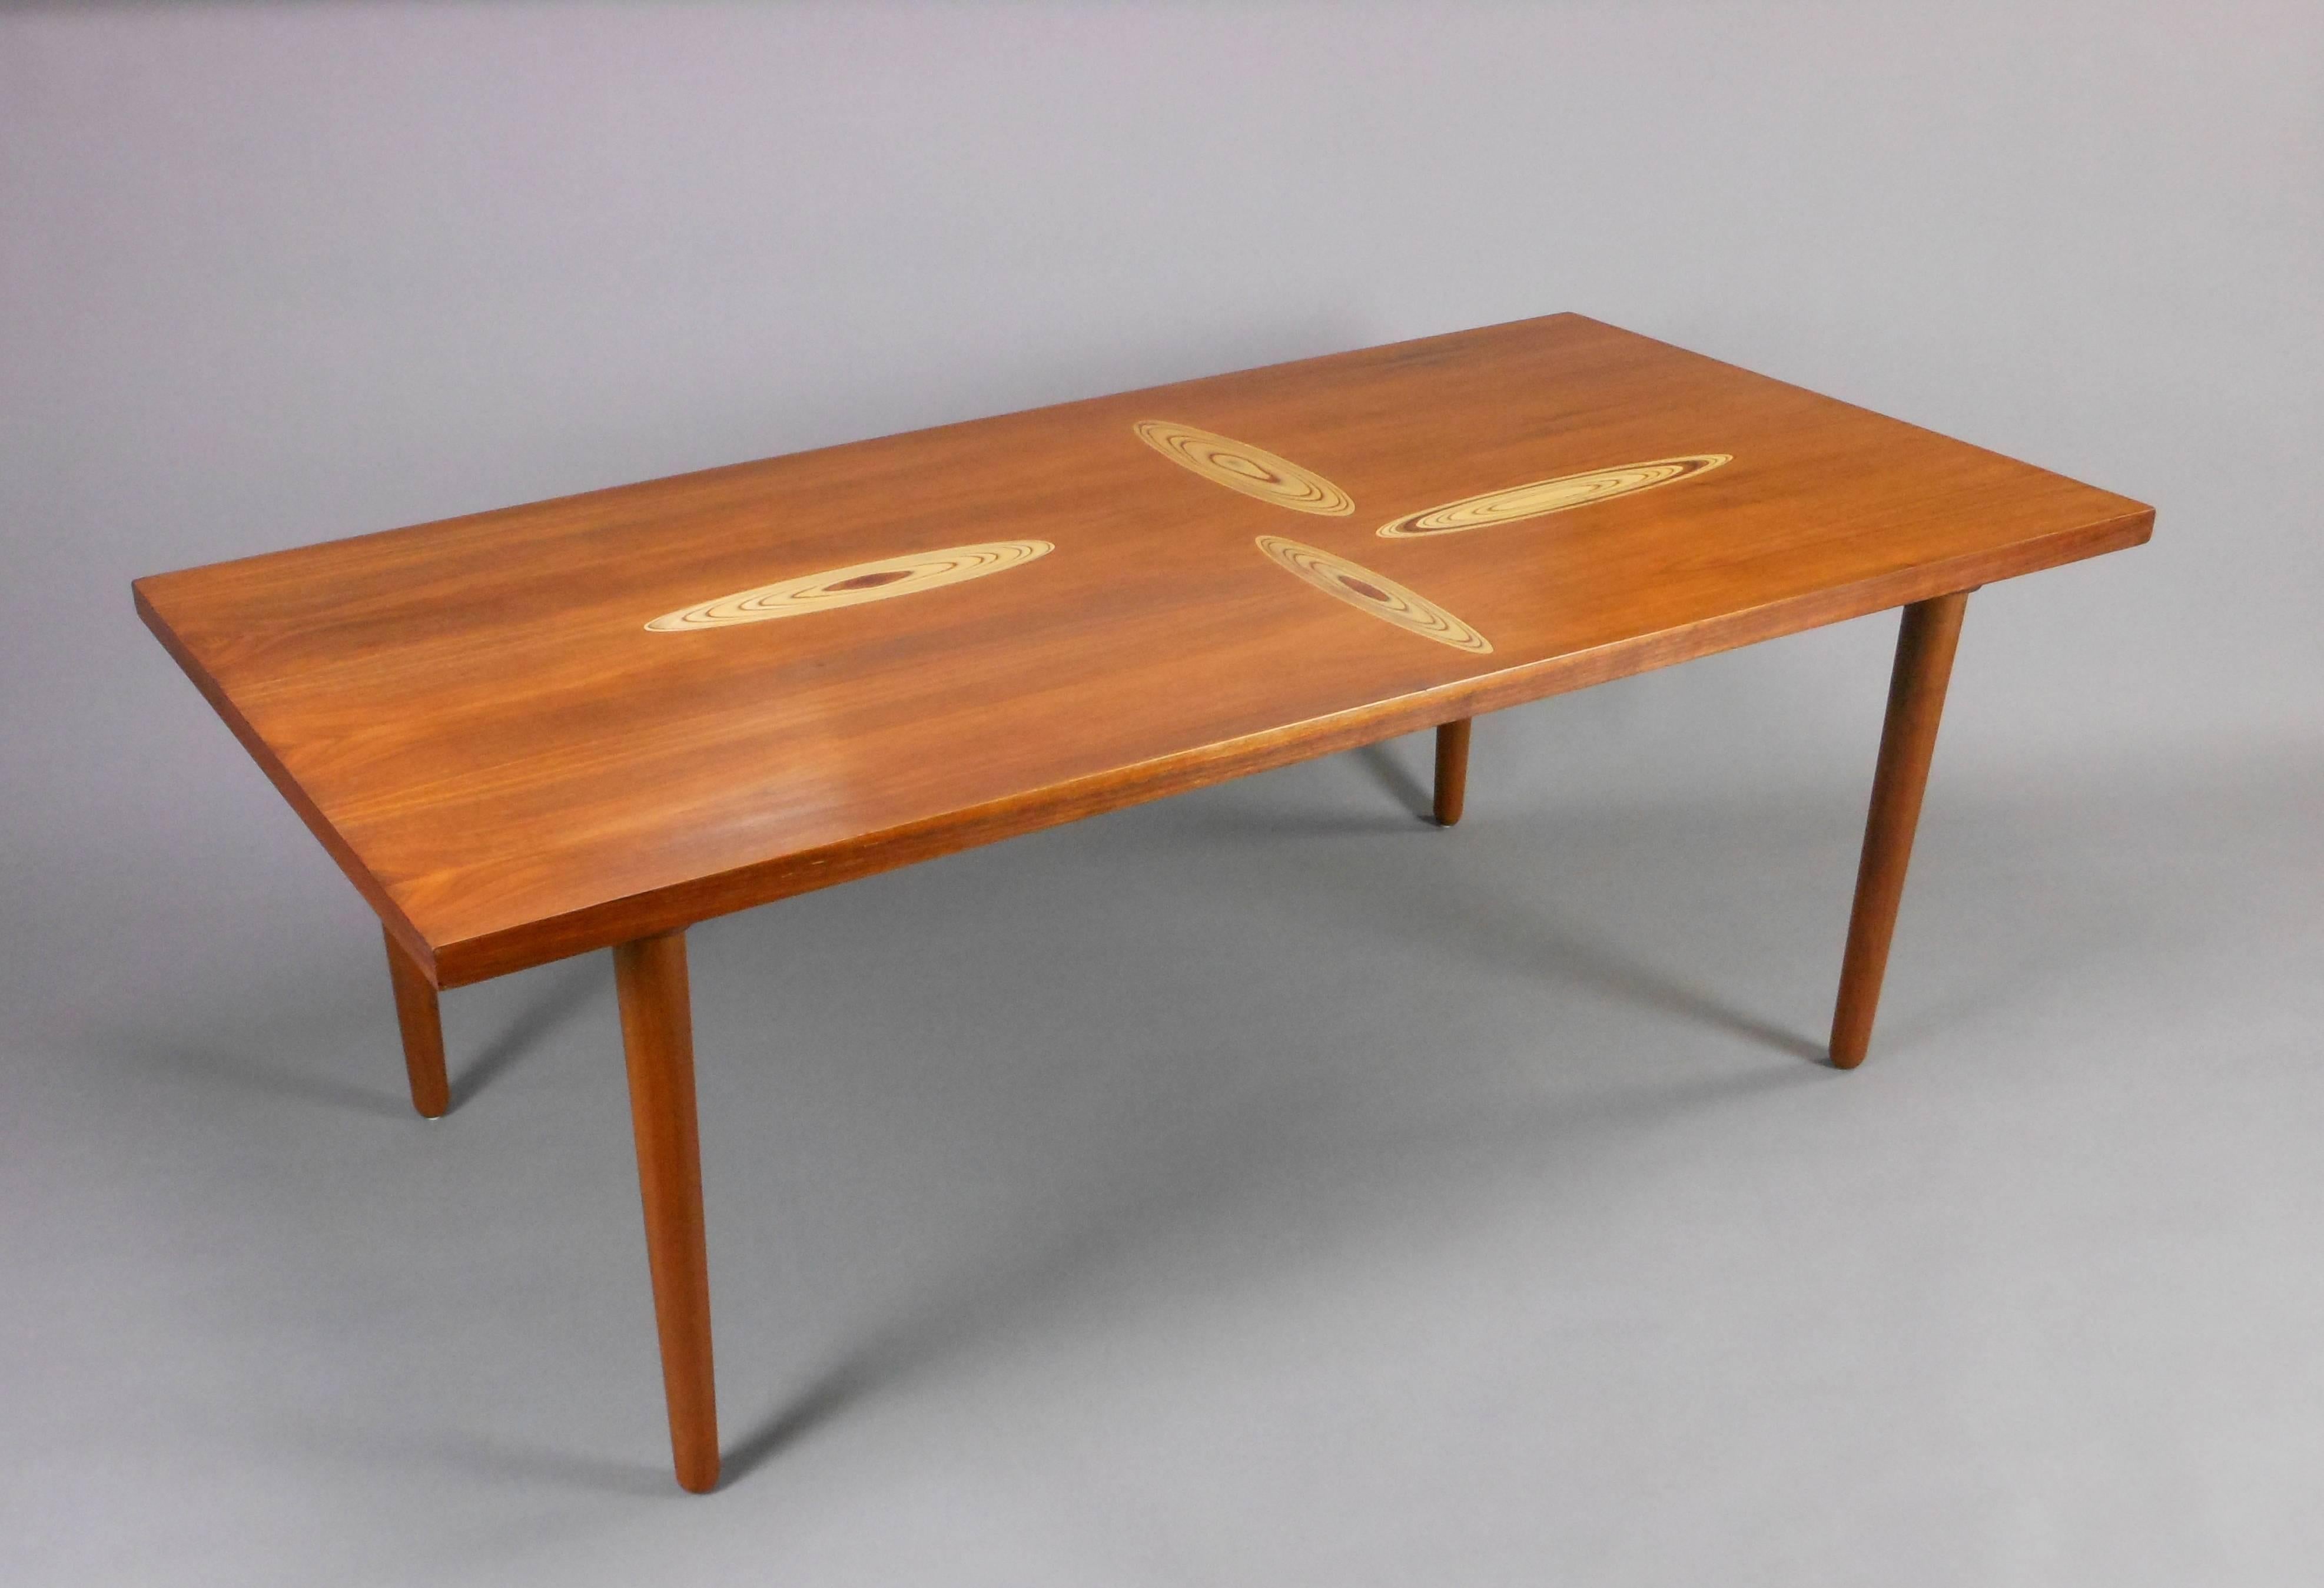 The rectangular top inlaid with elliptical crosscuts. Stamped on the underside : TAPIO WIRKKALA  ASKO MADE IN FINLAND